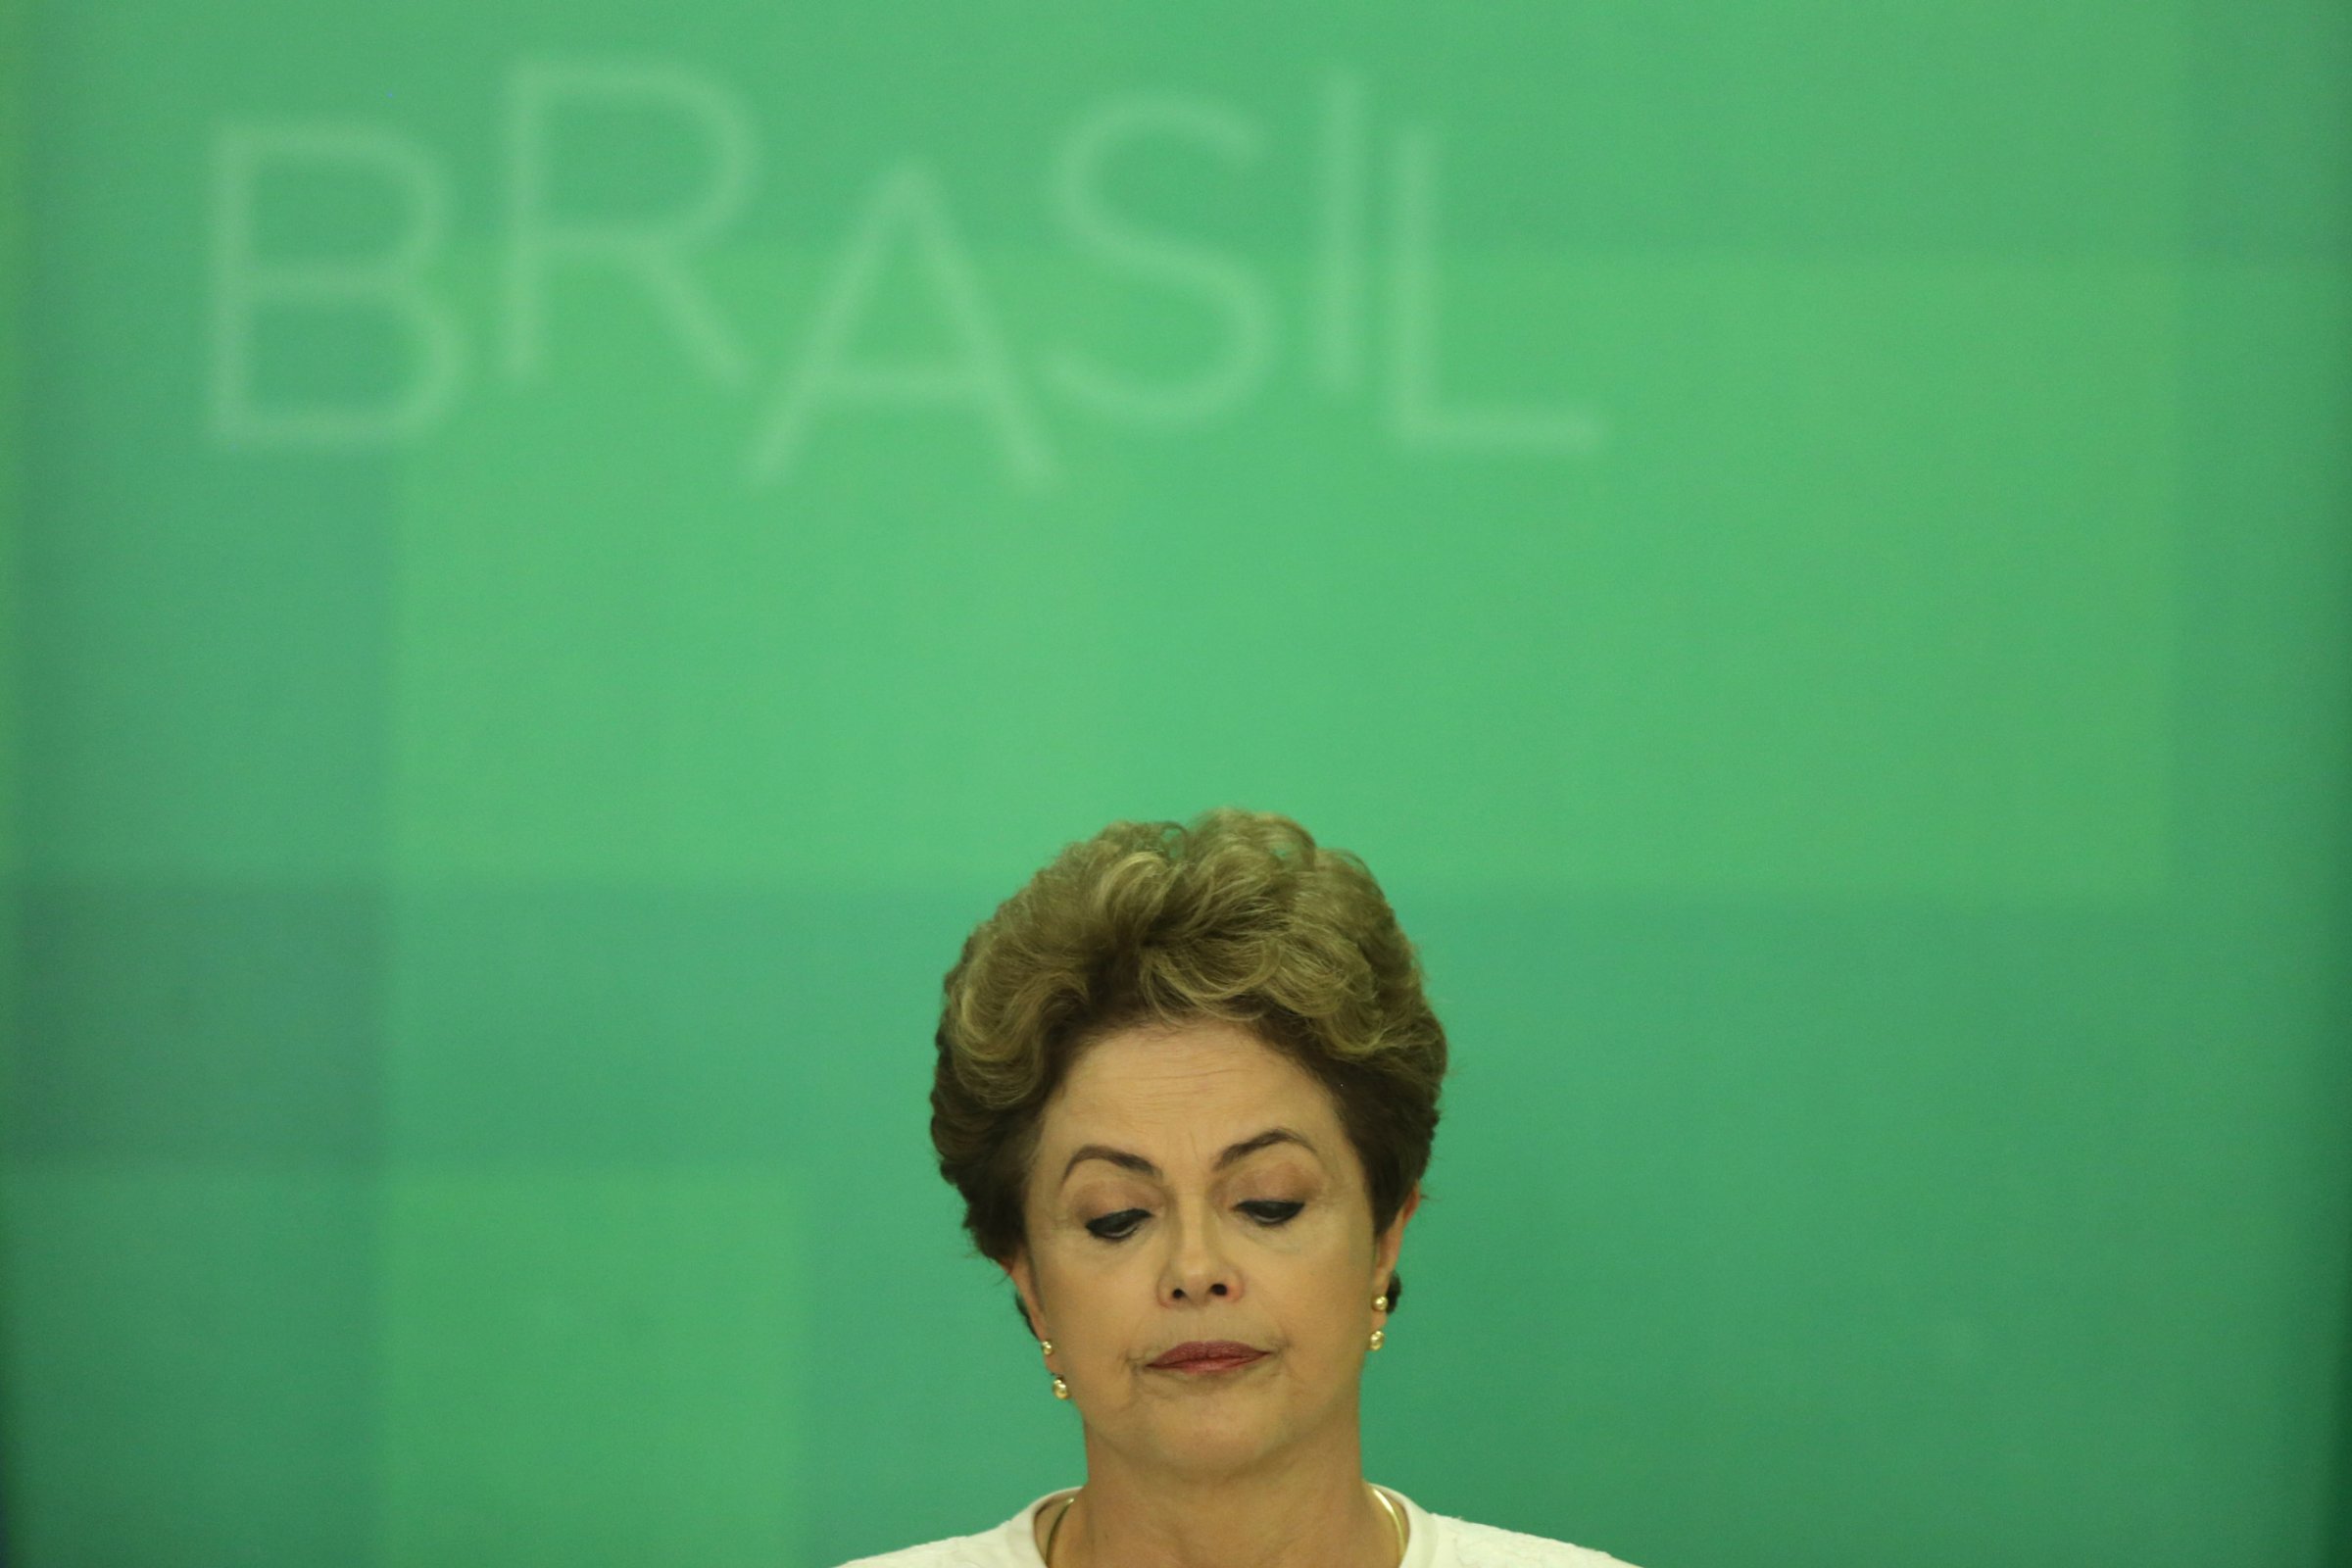 Brazil's President Dilma Rousseff looks down during a press conference after impeachment proceedings were opened against her by the President of Chamber of Deputies Eduardo Cunha, at the Planalto Presidential Palace in Brasilia, Brazil, Wednesday, Dec. 2, 2015. The speaker of the nation's lower house says he's opening the impeachment process based on accusations that Rousseff's government broke fiscal responsibility laws this year. (AP Photo/Eraldo Peres)